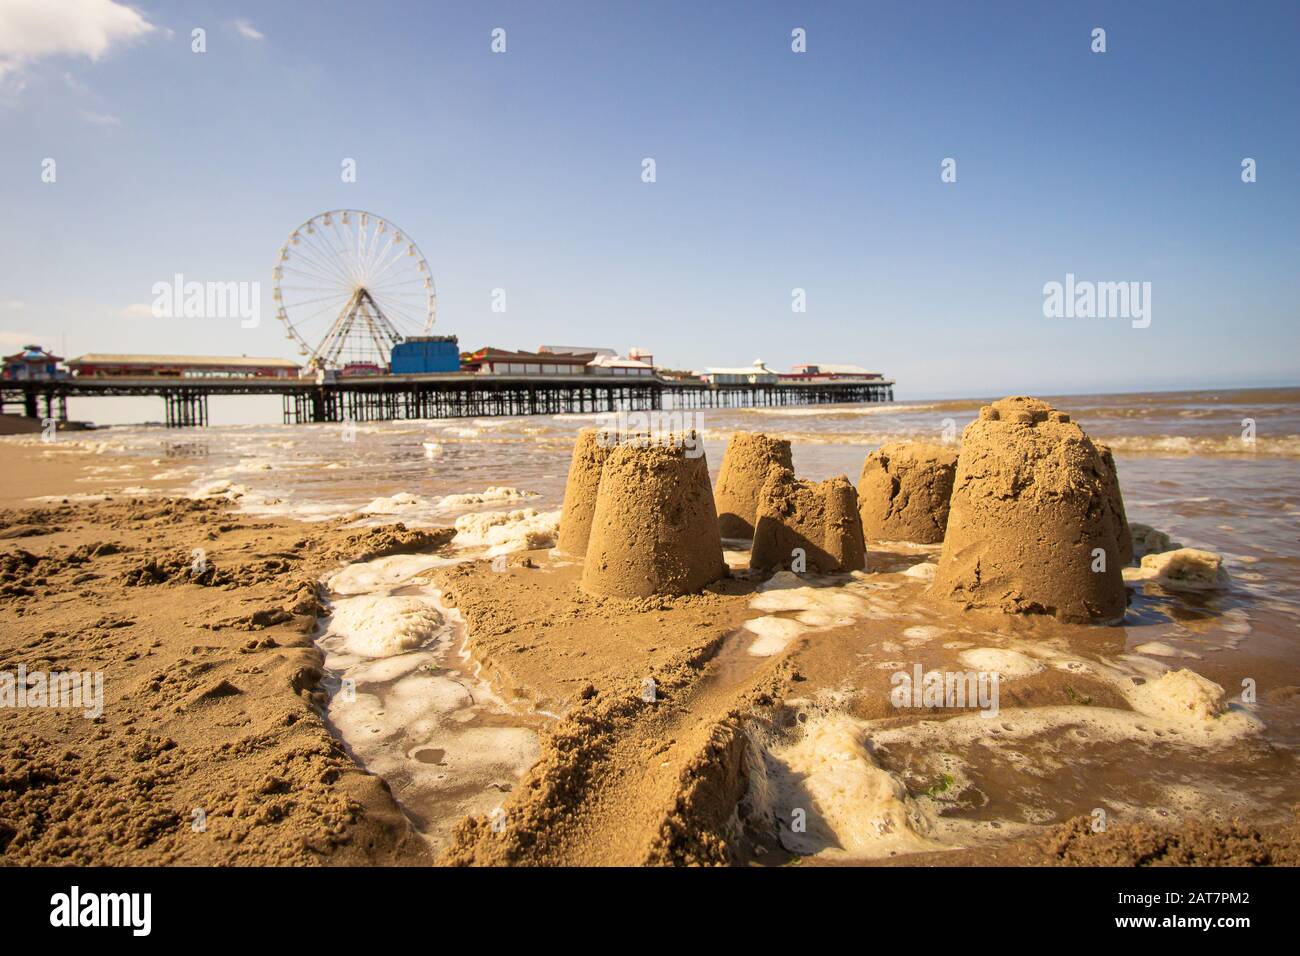 Sandcastles with the fair on Blackpool's Central pier in the background Stock Photo